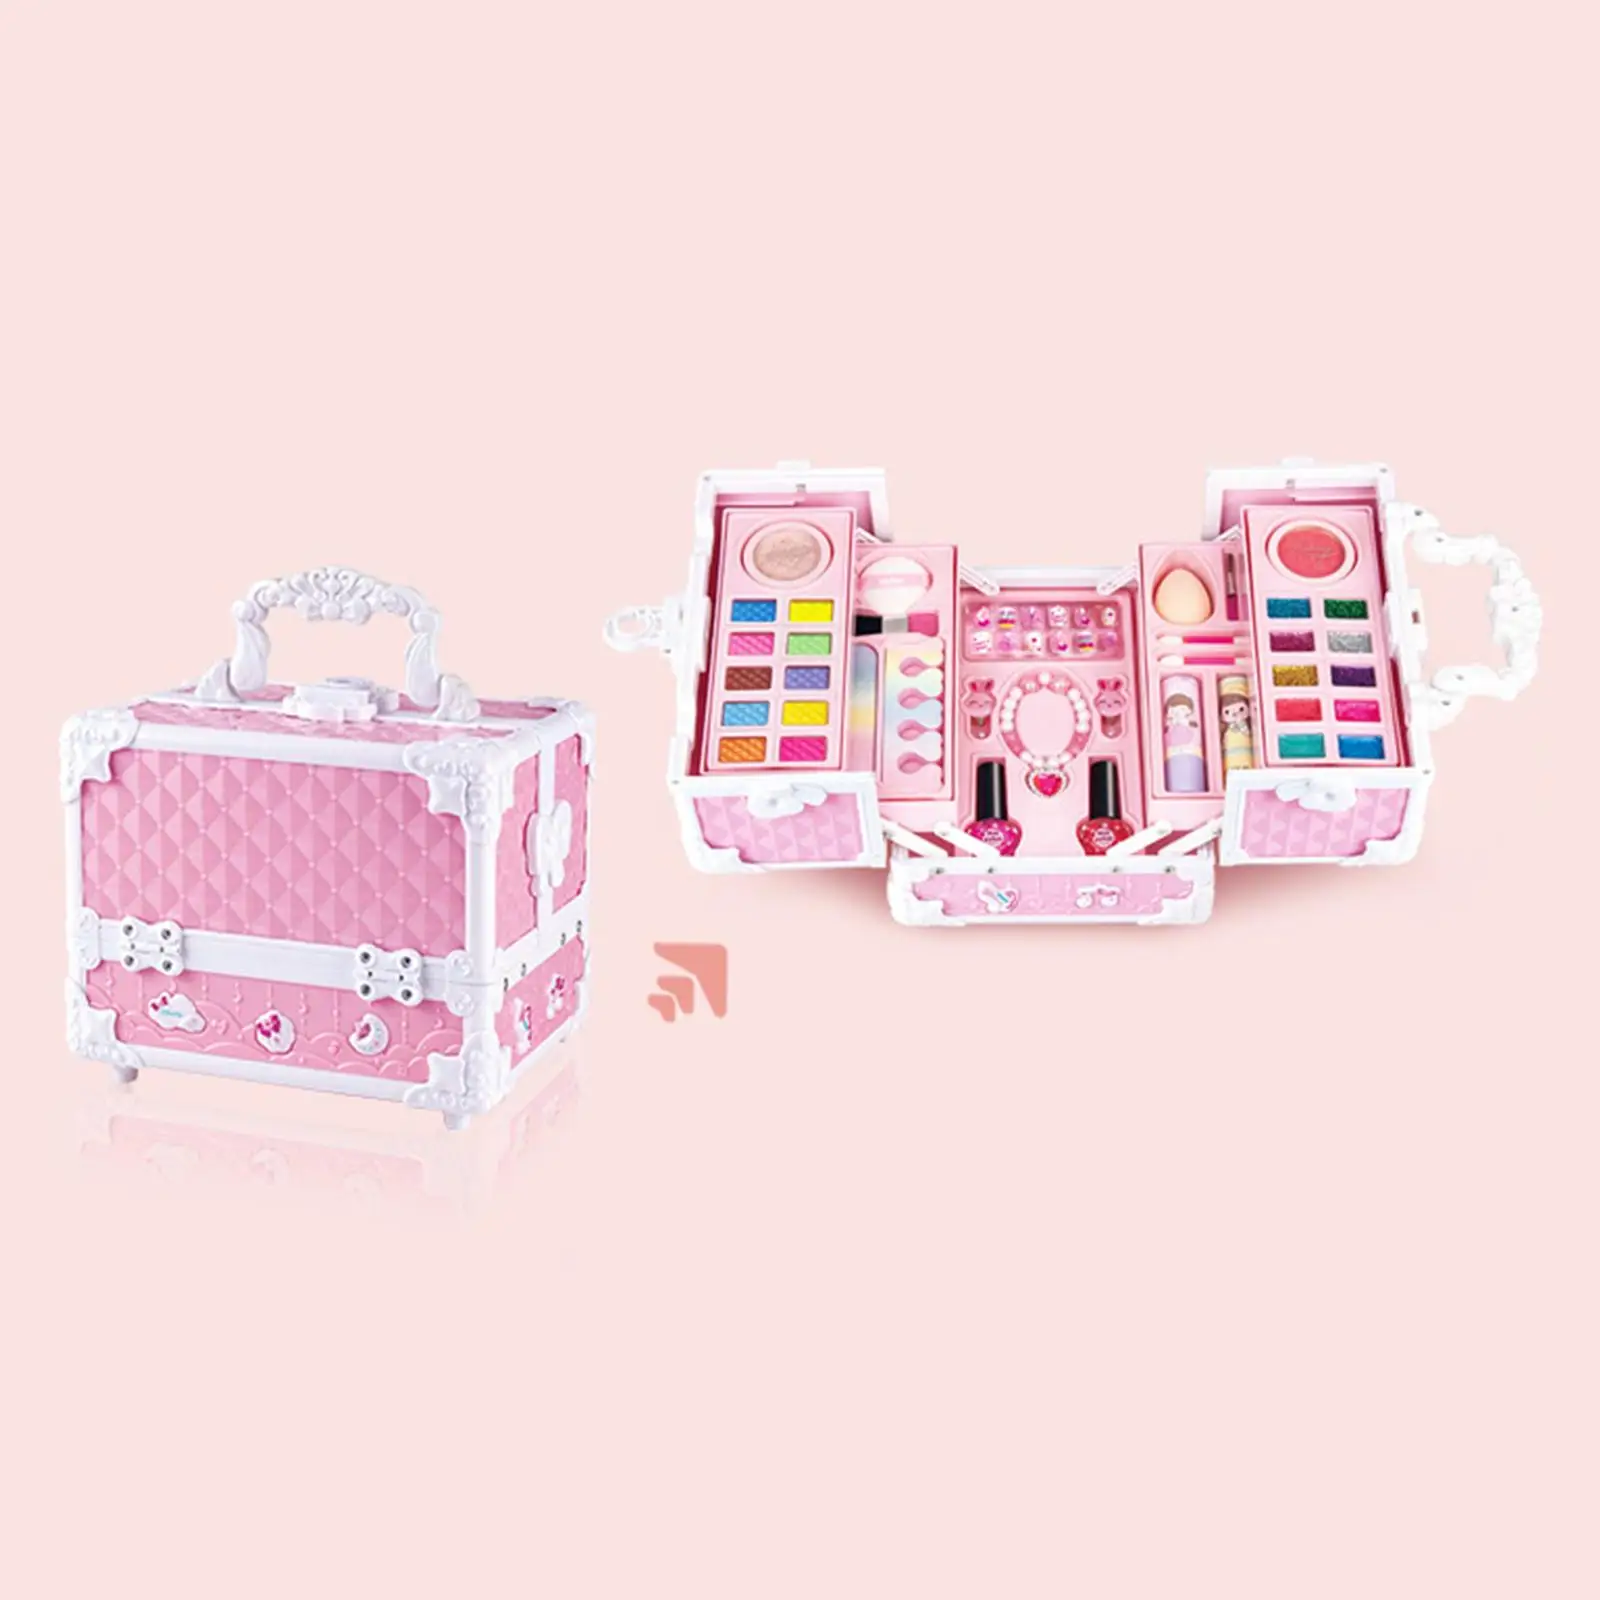 Makeup Toy Kits Pretend Cosmetic Makeup Accessories Role Playing Pretend Makeup Kits for Kids Girls Children Toddlers Halloween